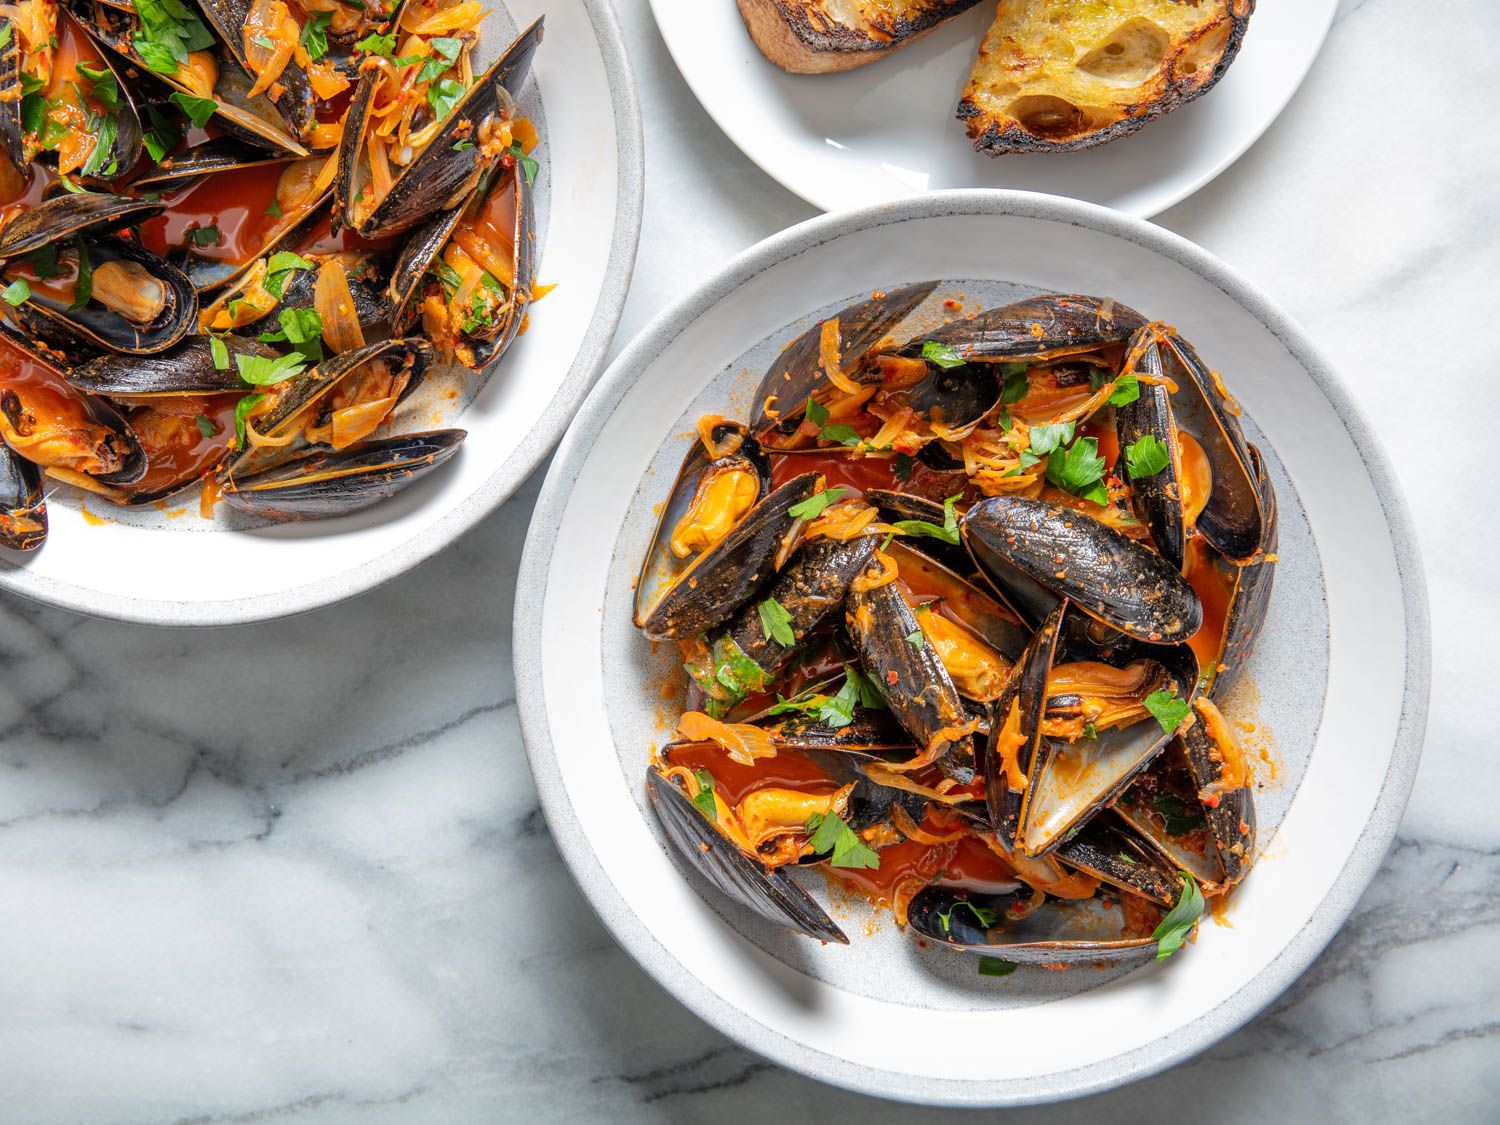 Spicy Steamed Mussels With Nduja